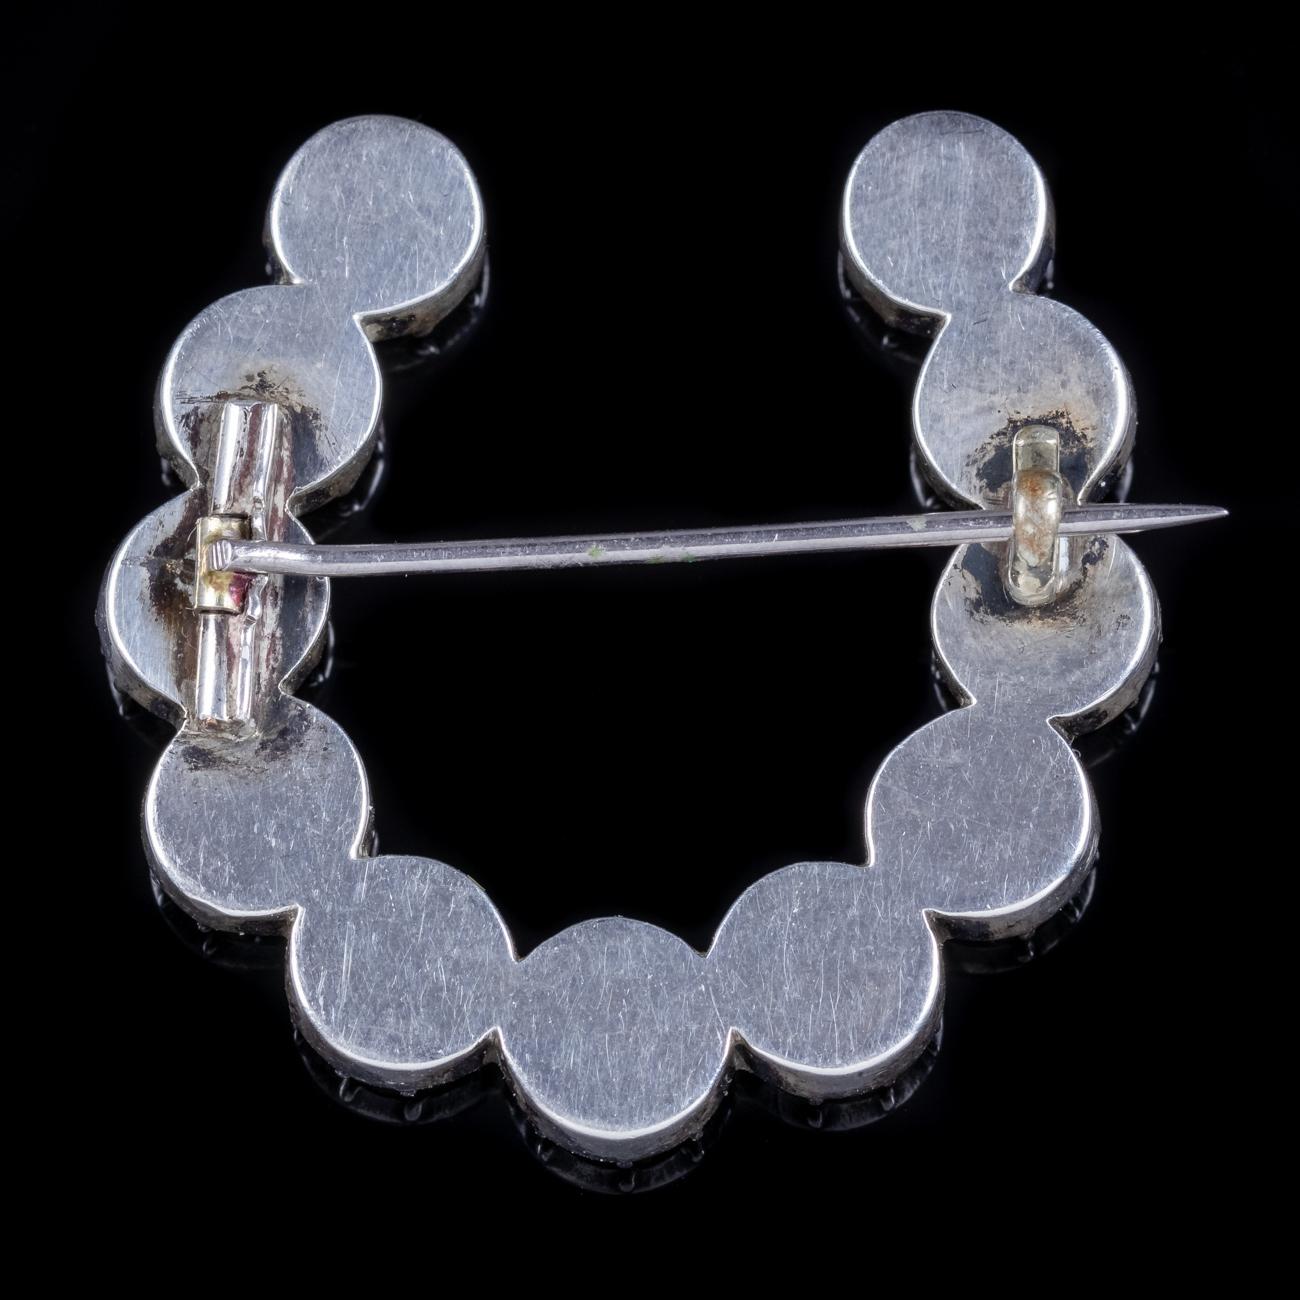 A lovely antique Georgian Horseshoe brooch C. 1800 adorned with eleven old cut Rock Crystal stones that sparkle like Diamonds. The beautiful clear Rock crystal is a colourless form of Quartz that was once believed by ancients to be a form of